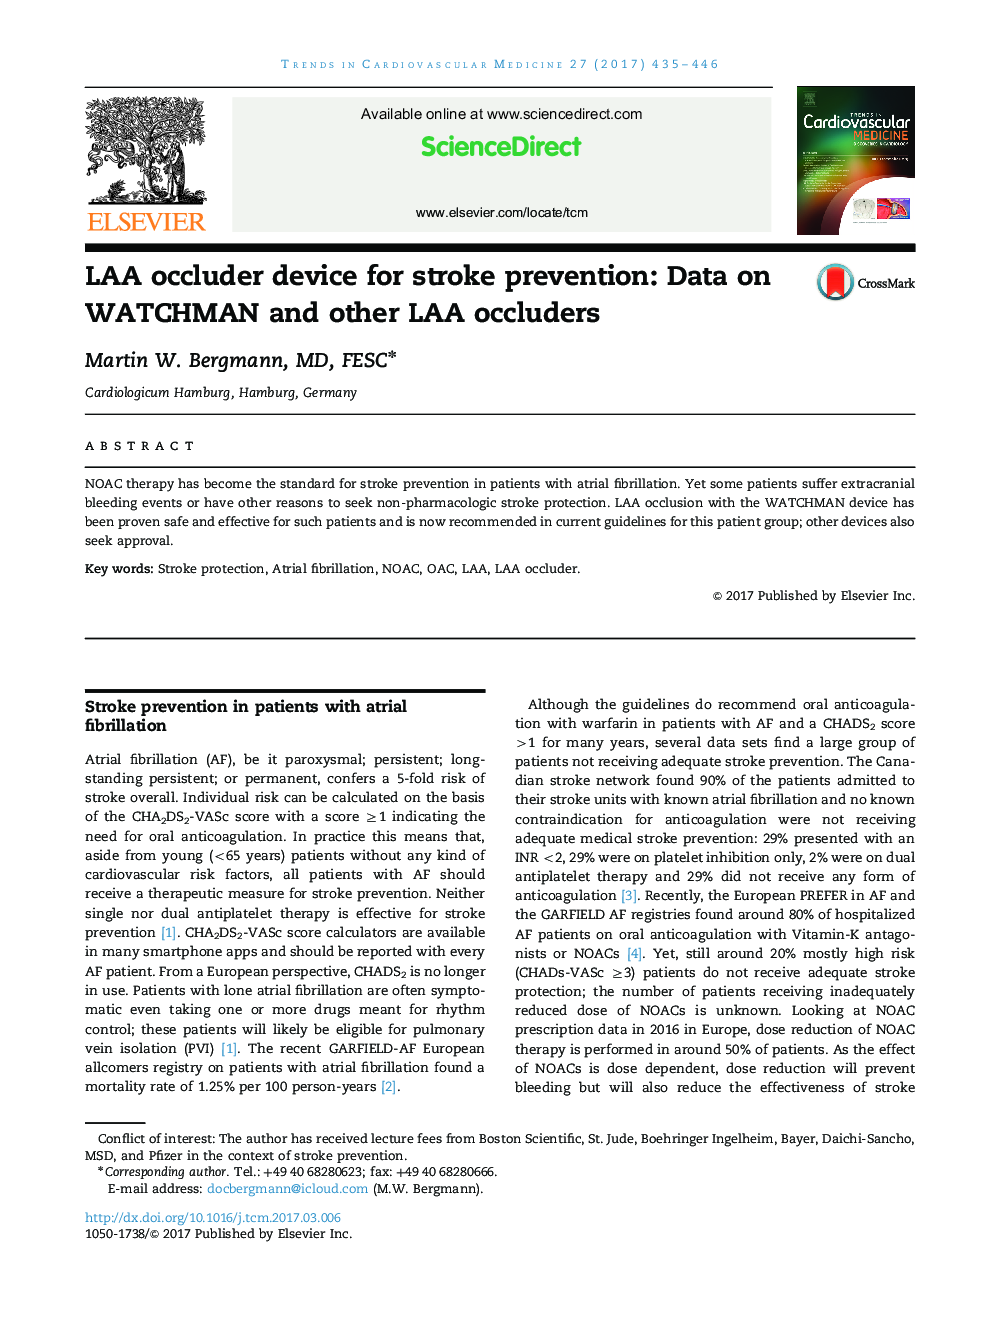 LAA occluder device for stroke prevention: Data on WATCHMAN and other LAA occluders